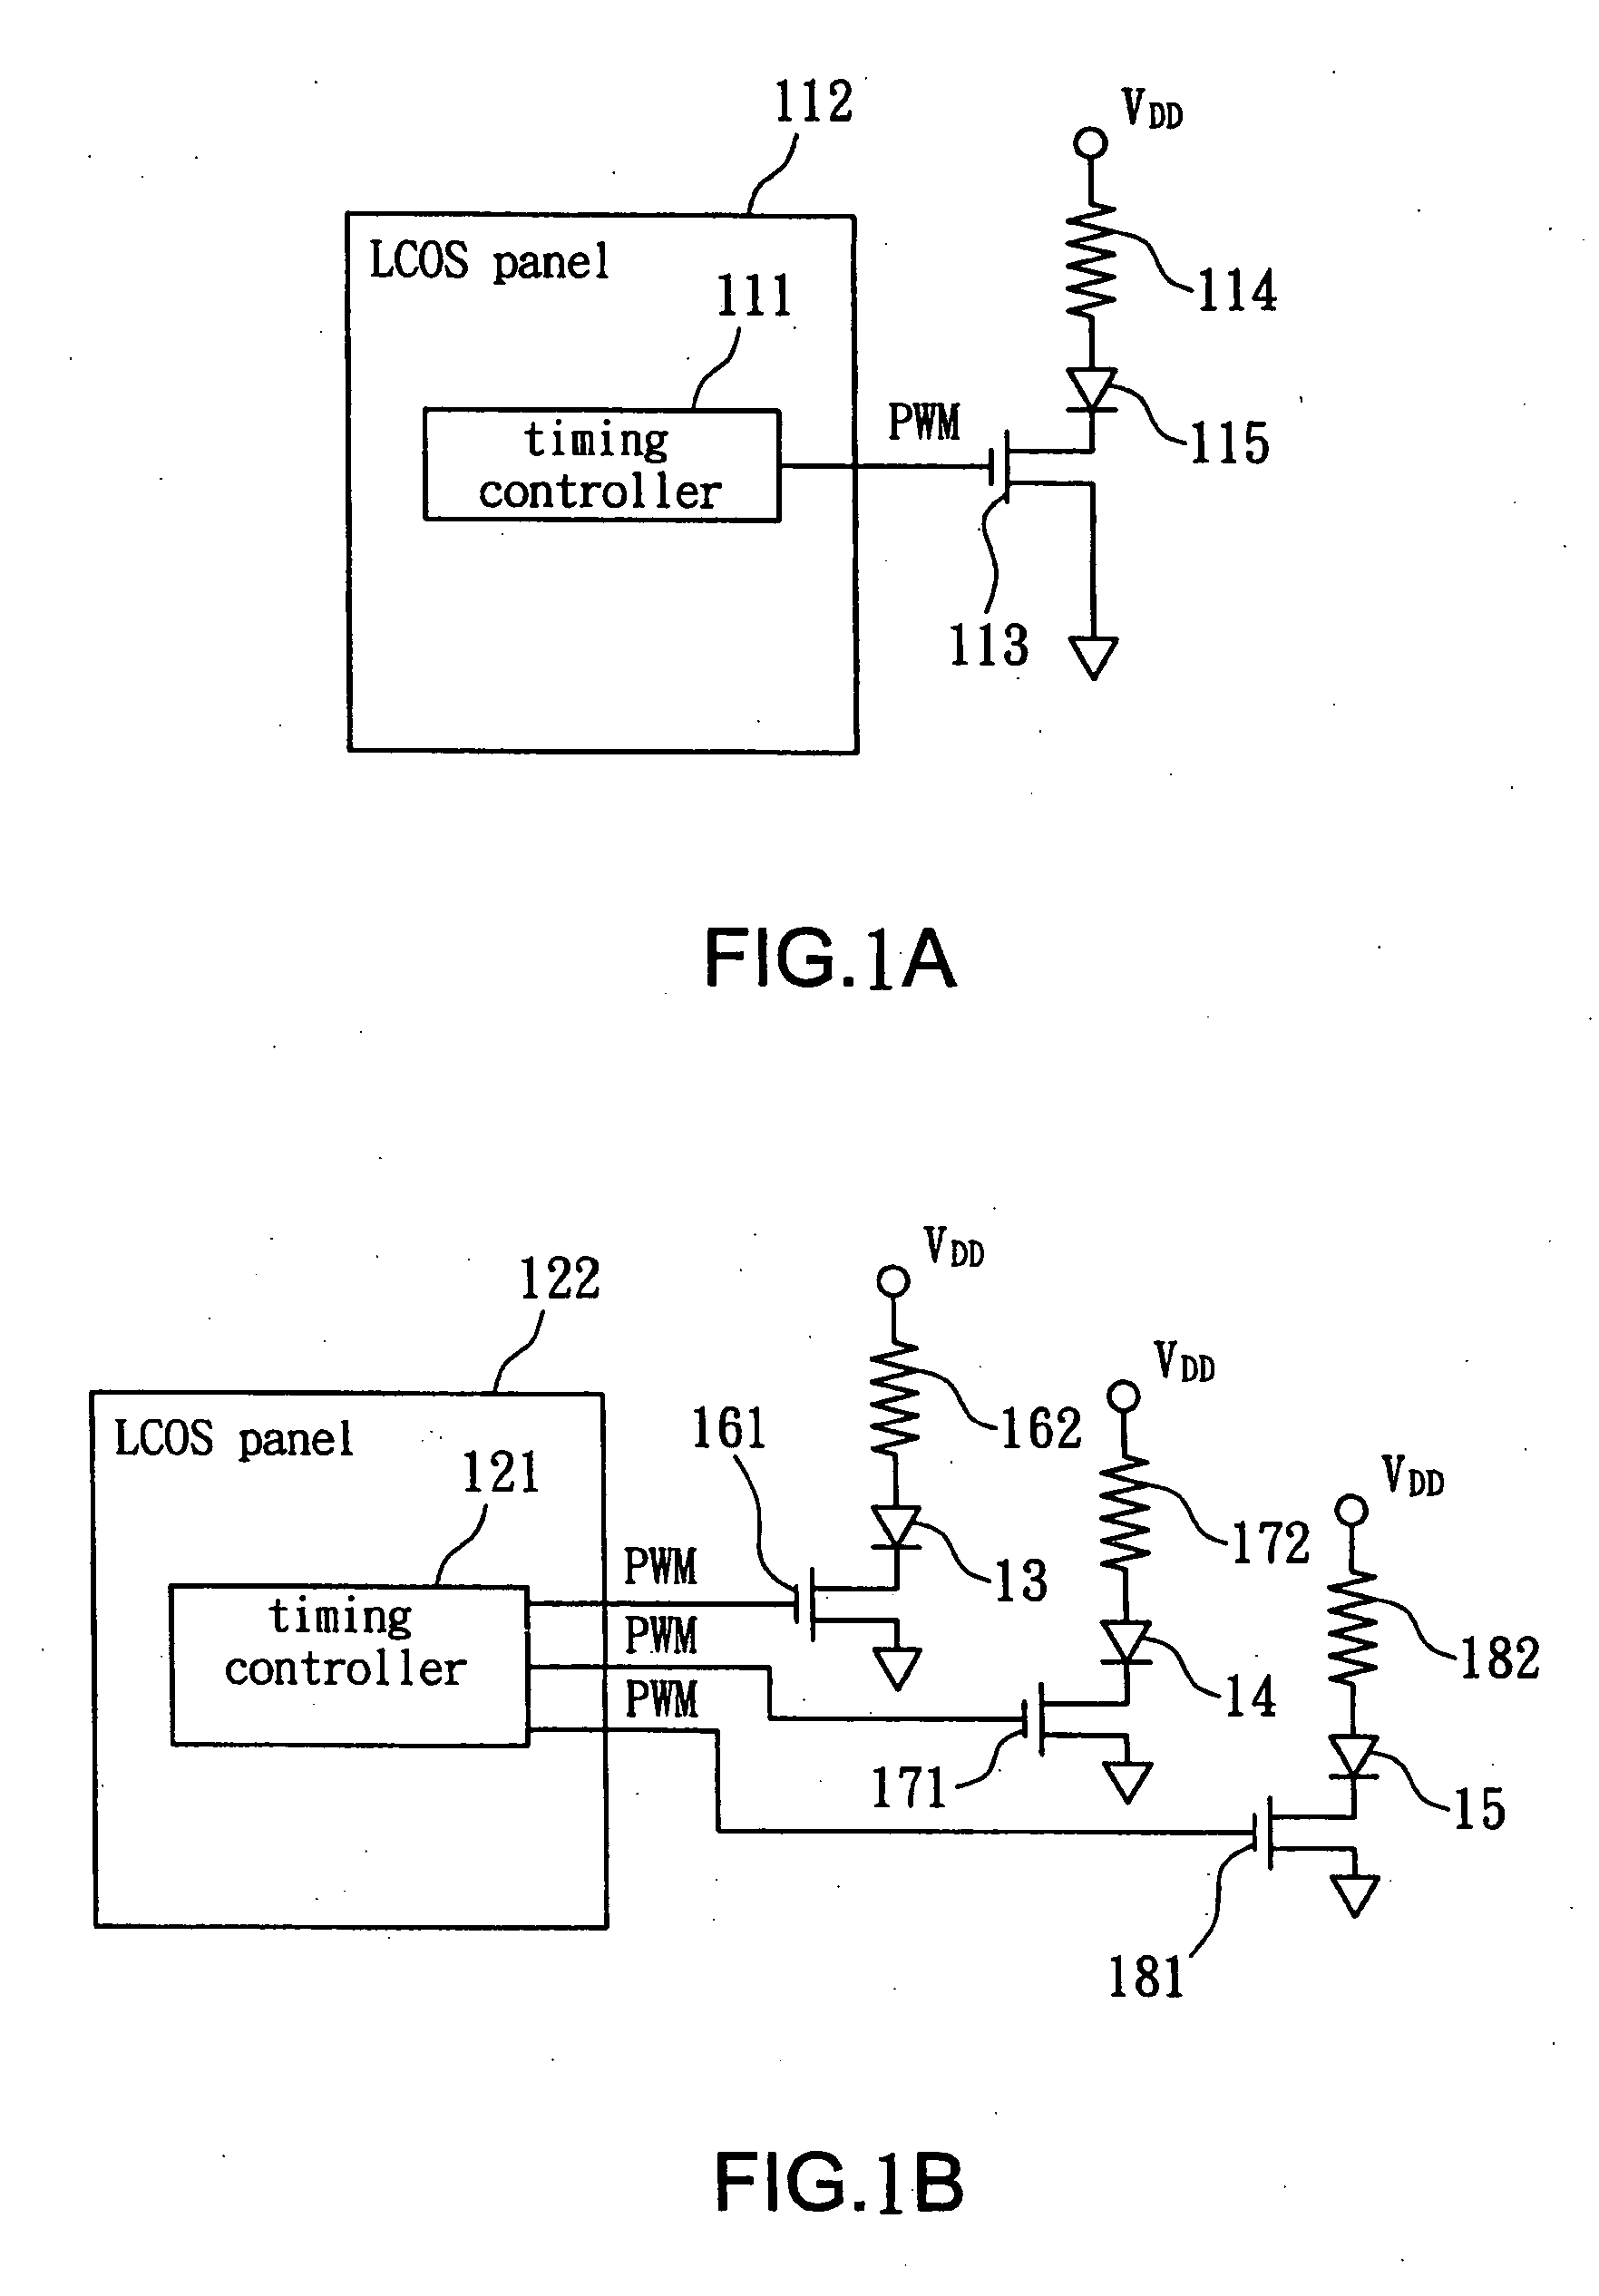 Driving system of light emitting diode